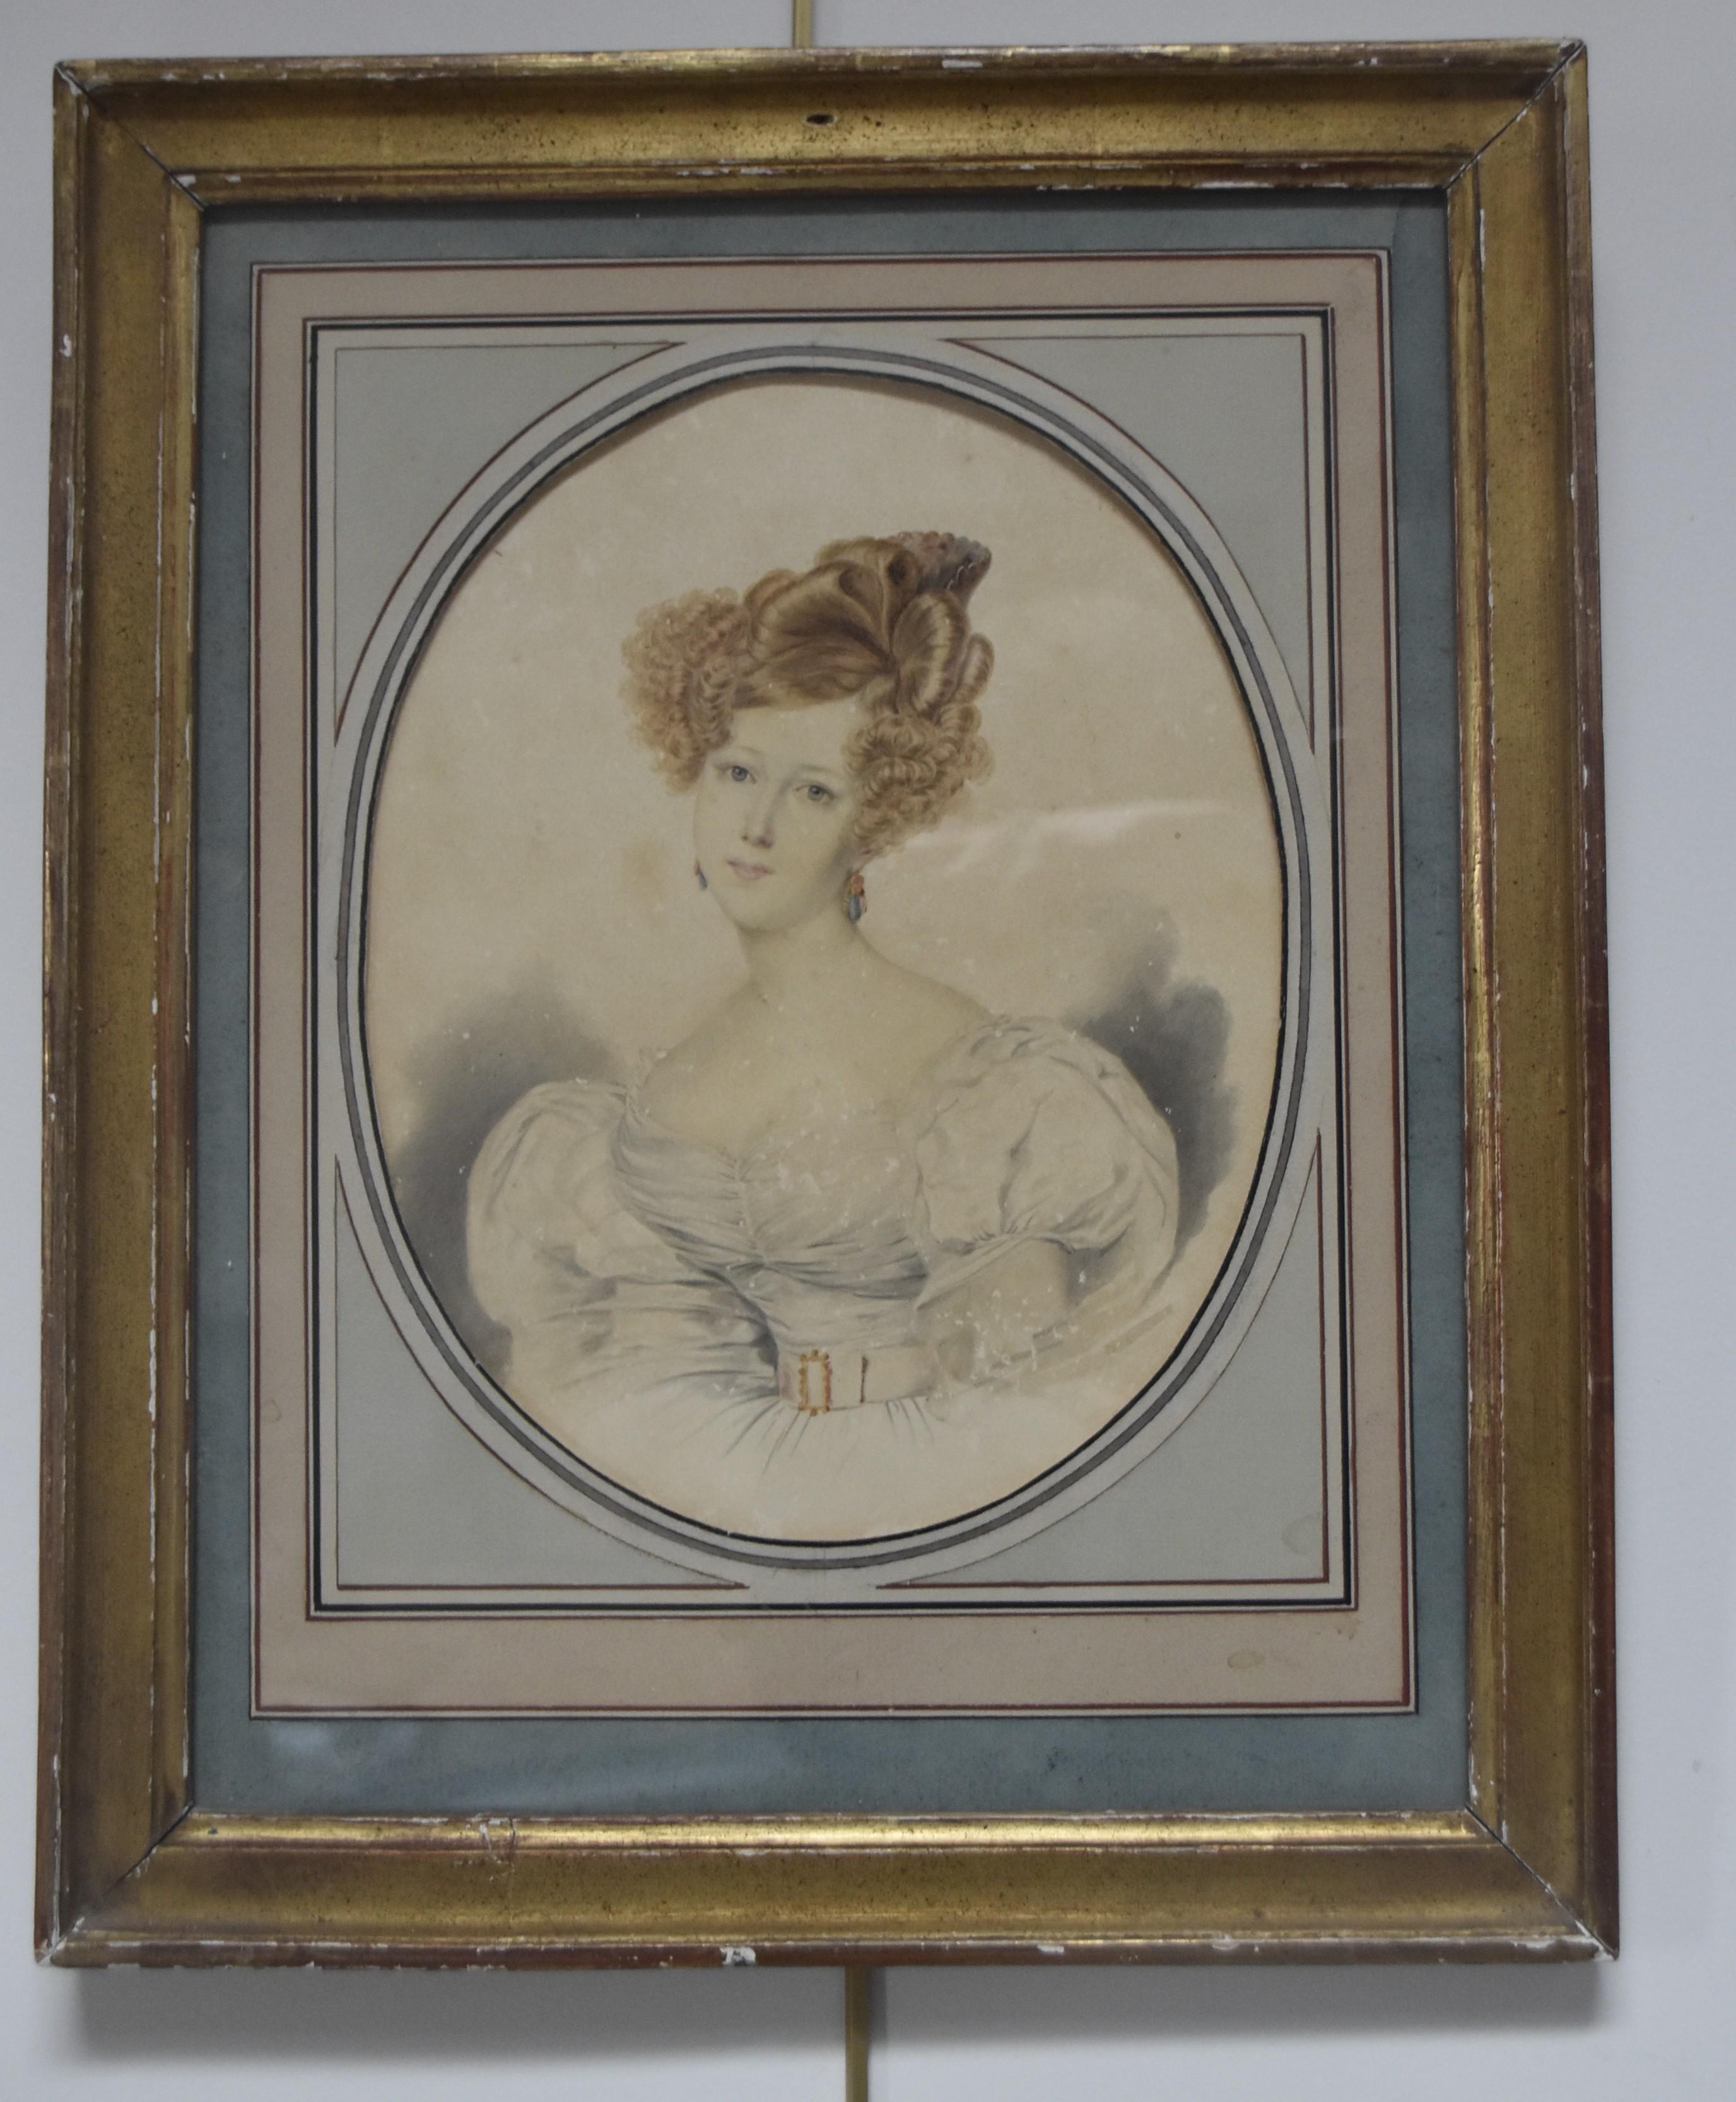 French school circa 1840, Portrait of a Lady, watercolor - Gray Figurative Art by Unknown